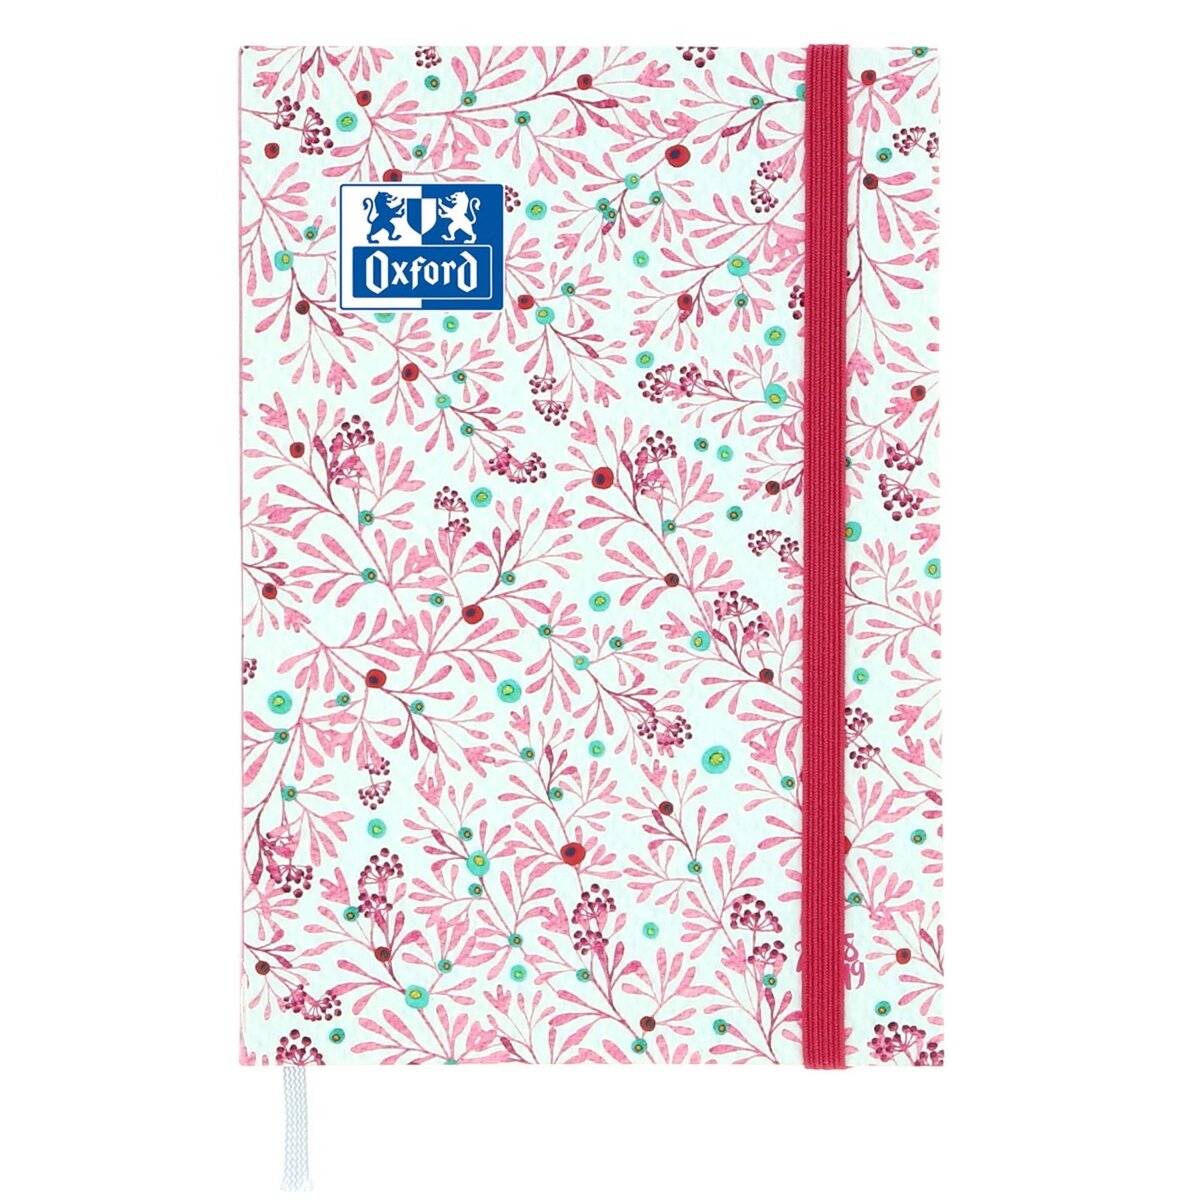 OXFORD Agenda scolaire journalier fille 12x18 Flowers - Feuilles roses 2018-2019